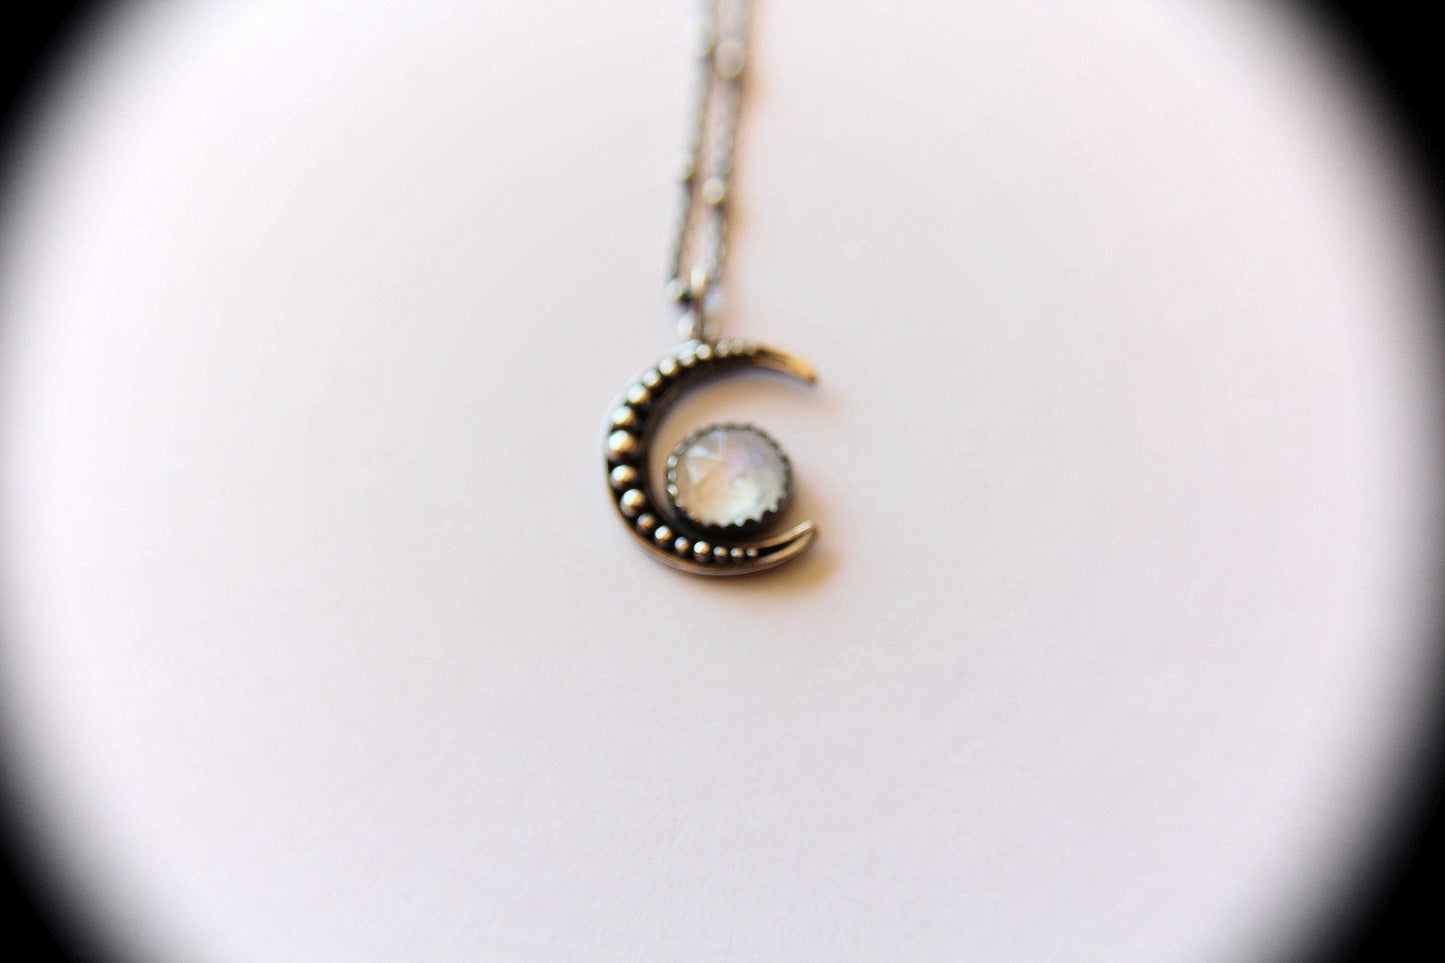 Crescent Moon Necklace, Moonstone Necklace, Silver Crescent Moon Necklace, Crescent Moon Jewelry, Moonstone Jewelry, Moon Child, Gift